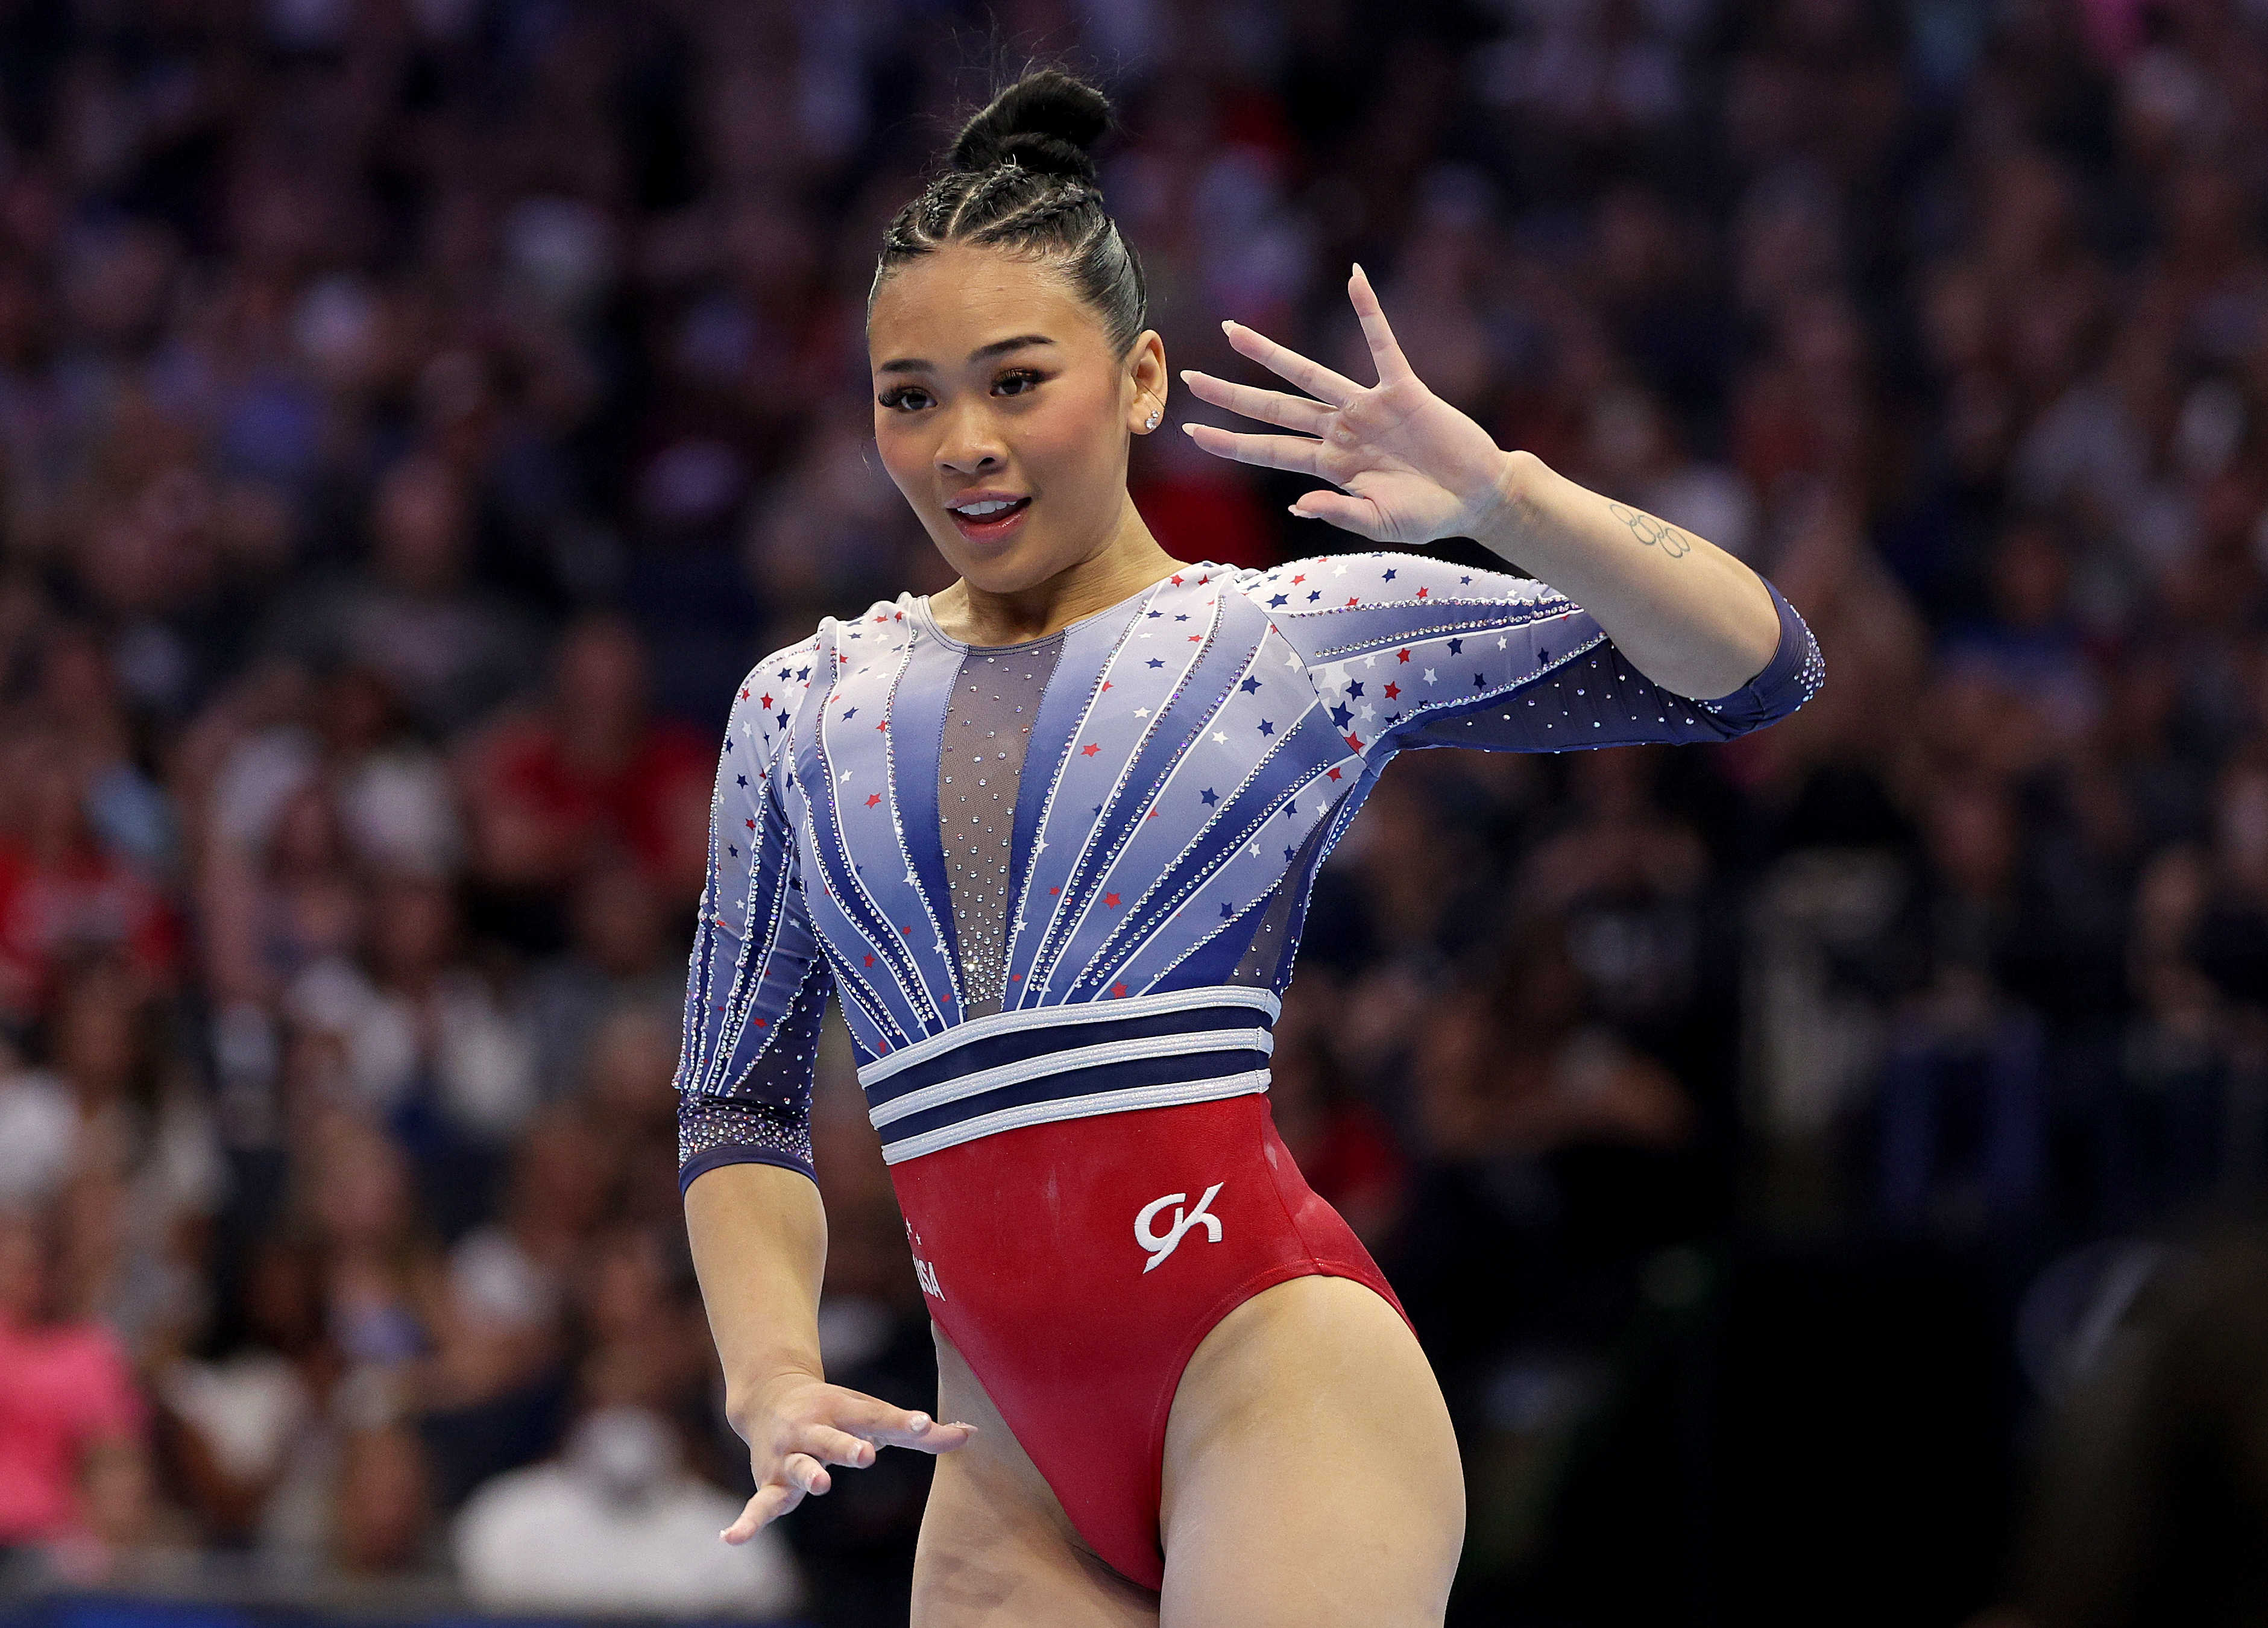 What to know about American gymnast Suni Lee ahead of the 2024 Olympics